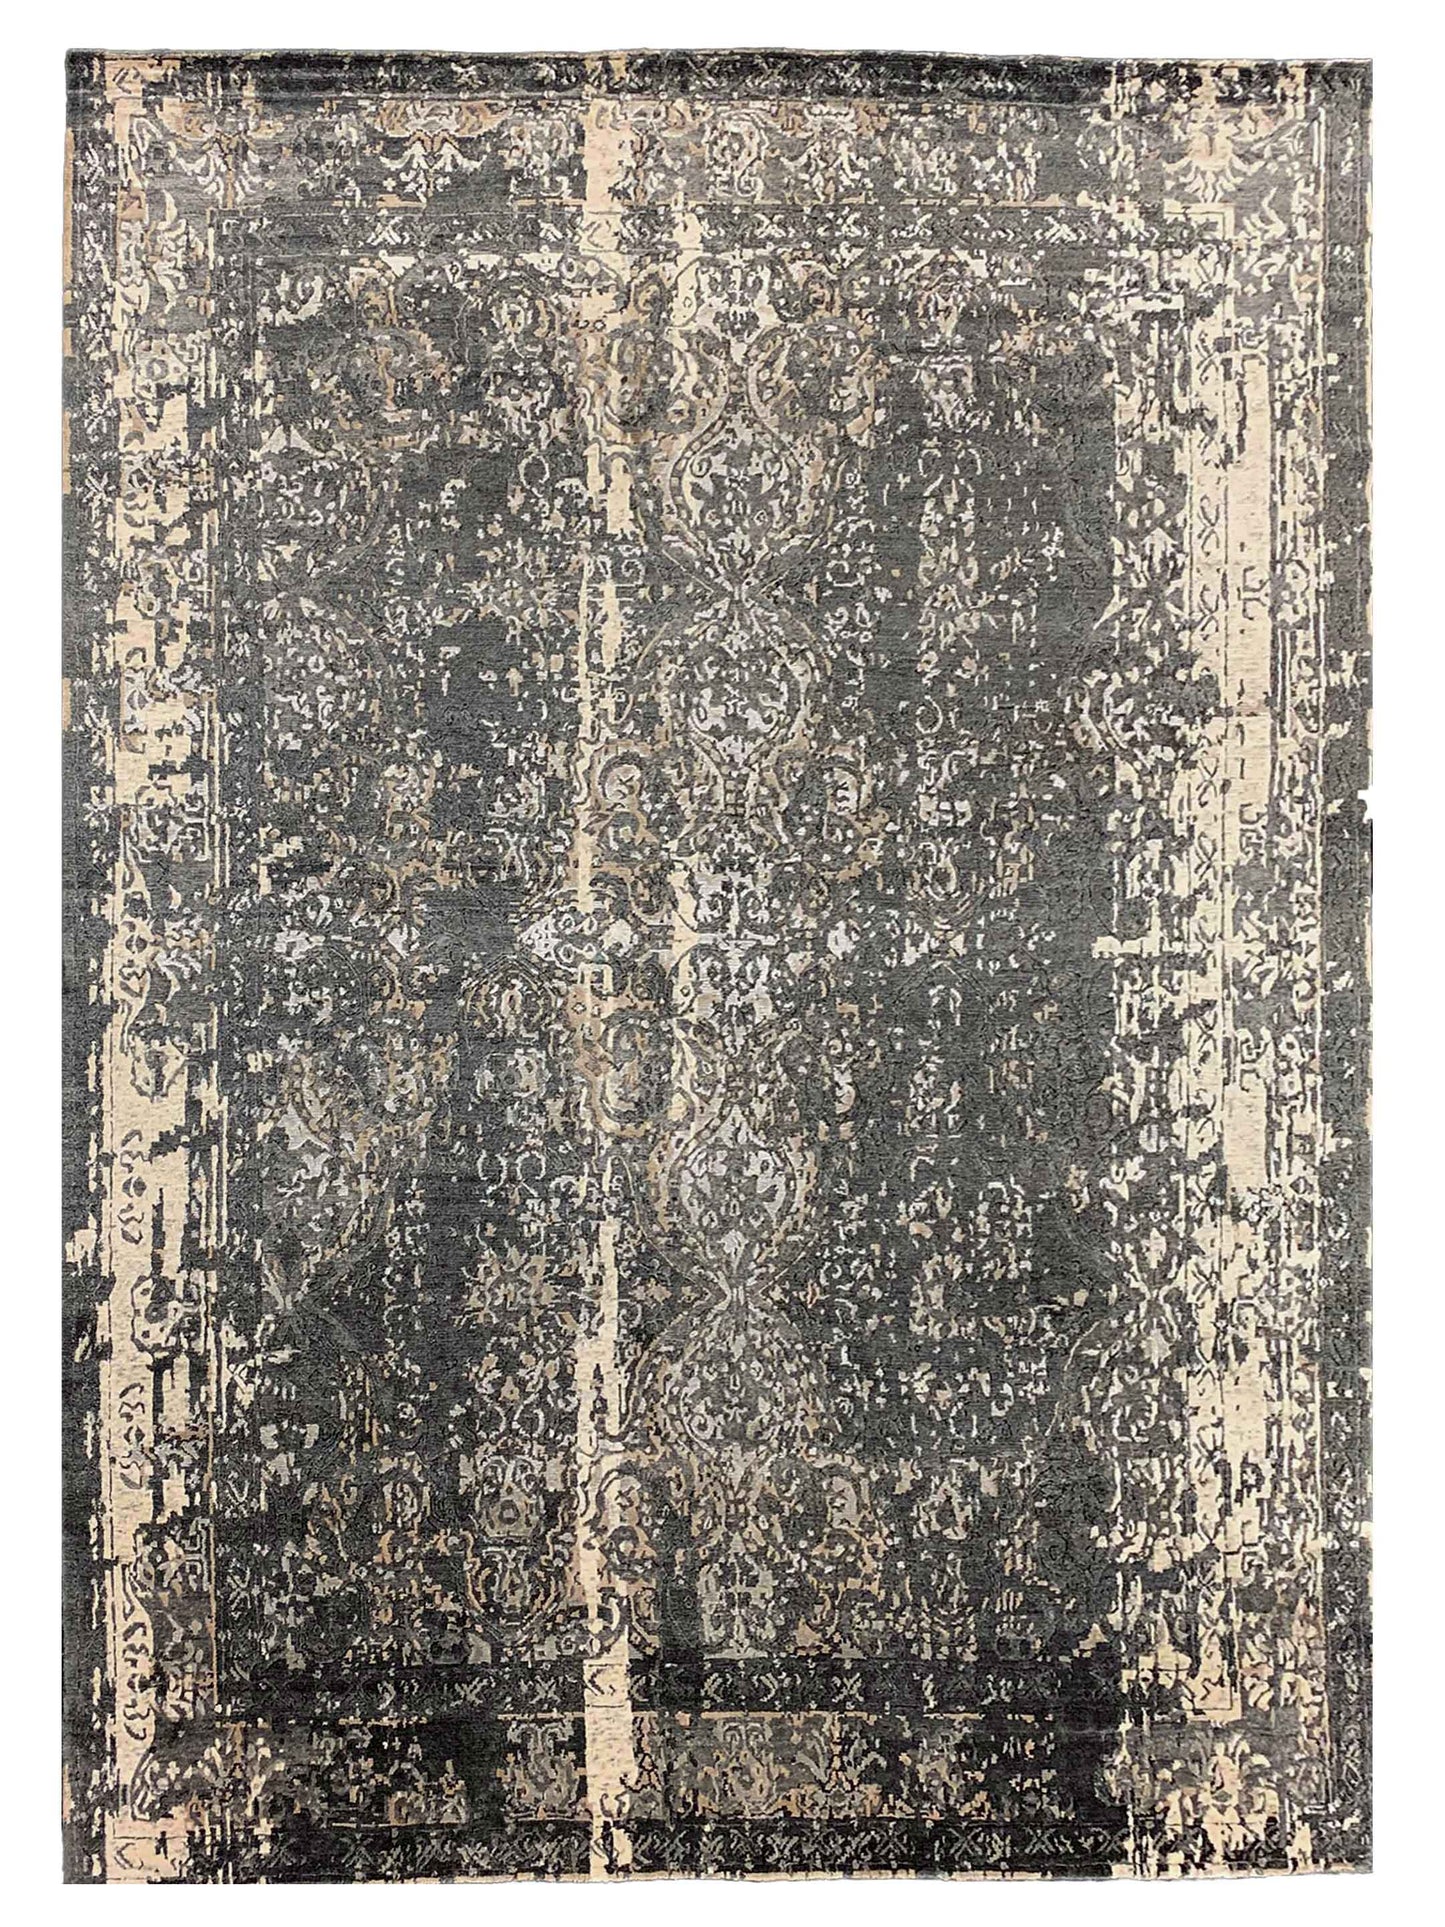 Artisan Mary MN-210 Dk.Grey Contemporary Knotted Rug